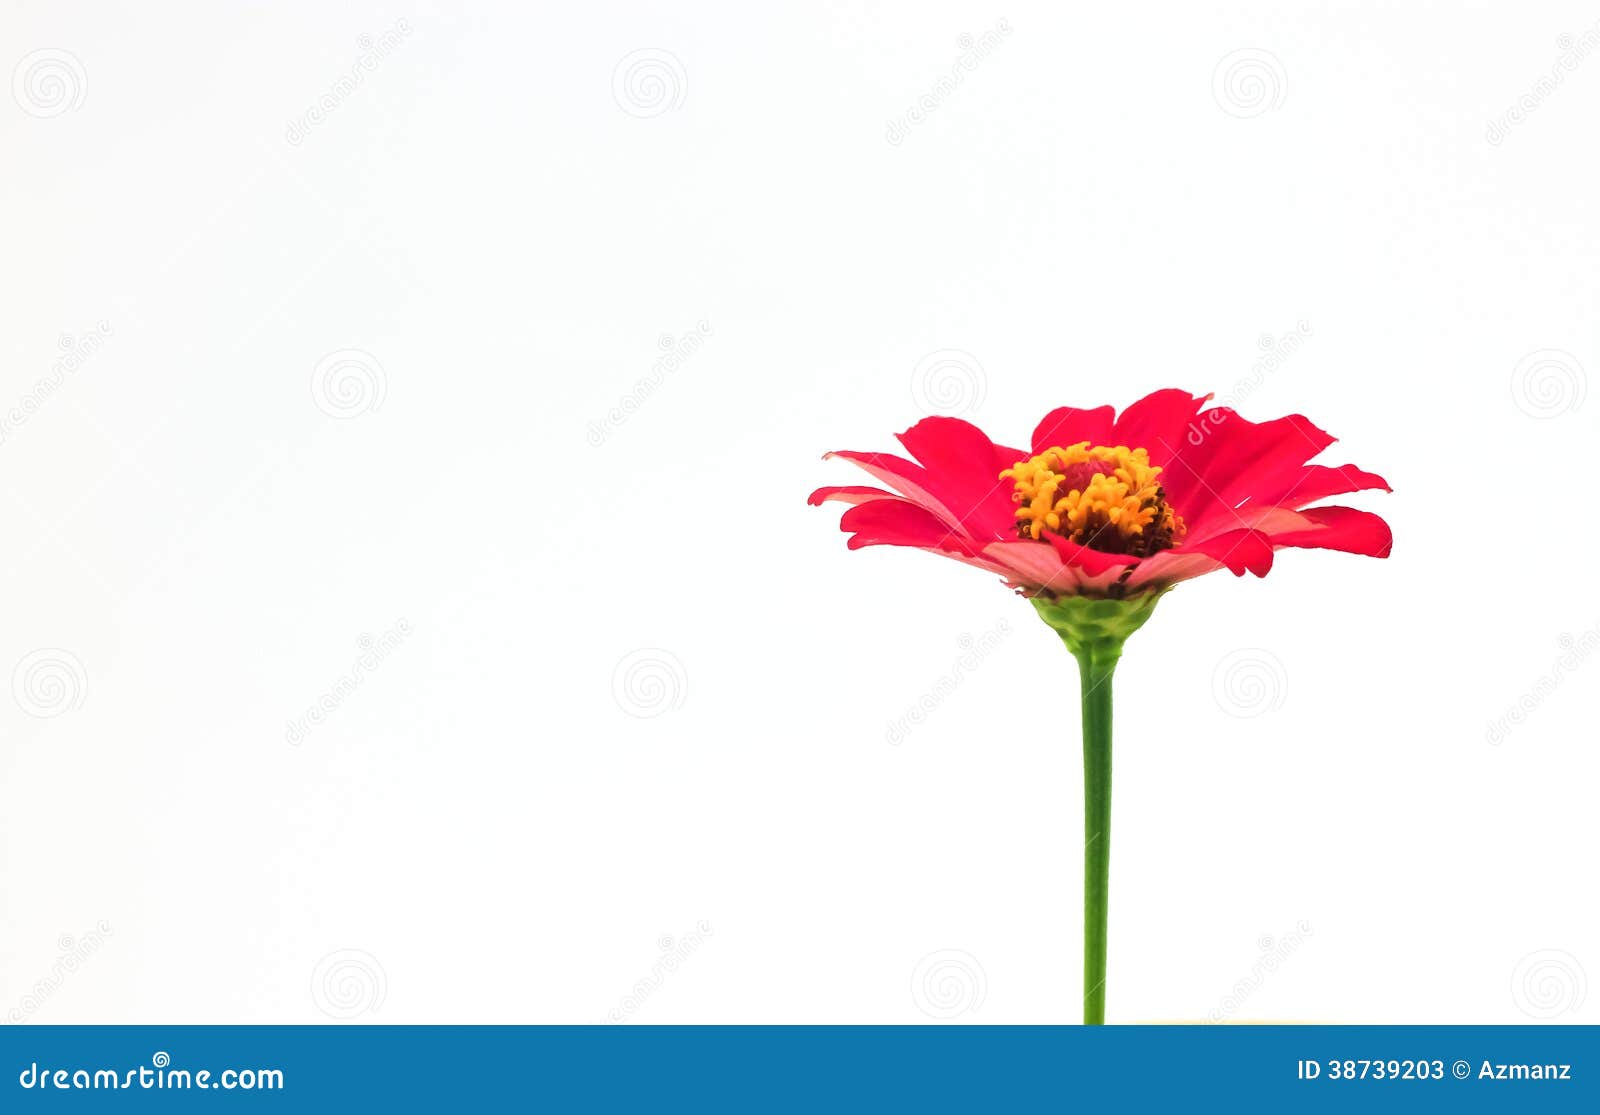 Red Flower Isolated On White Background Stock Image - Image of